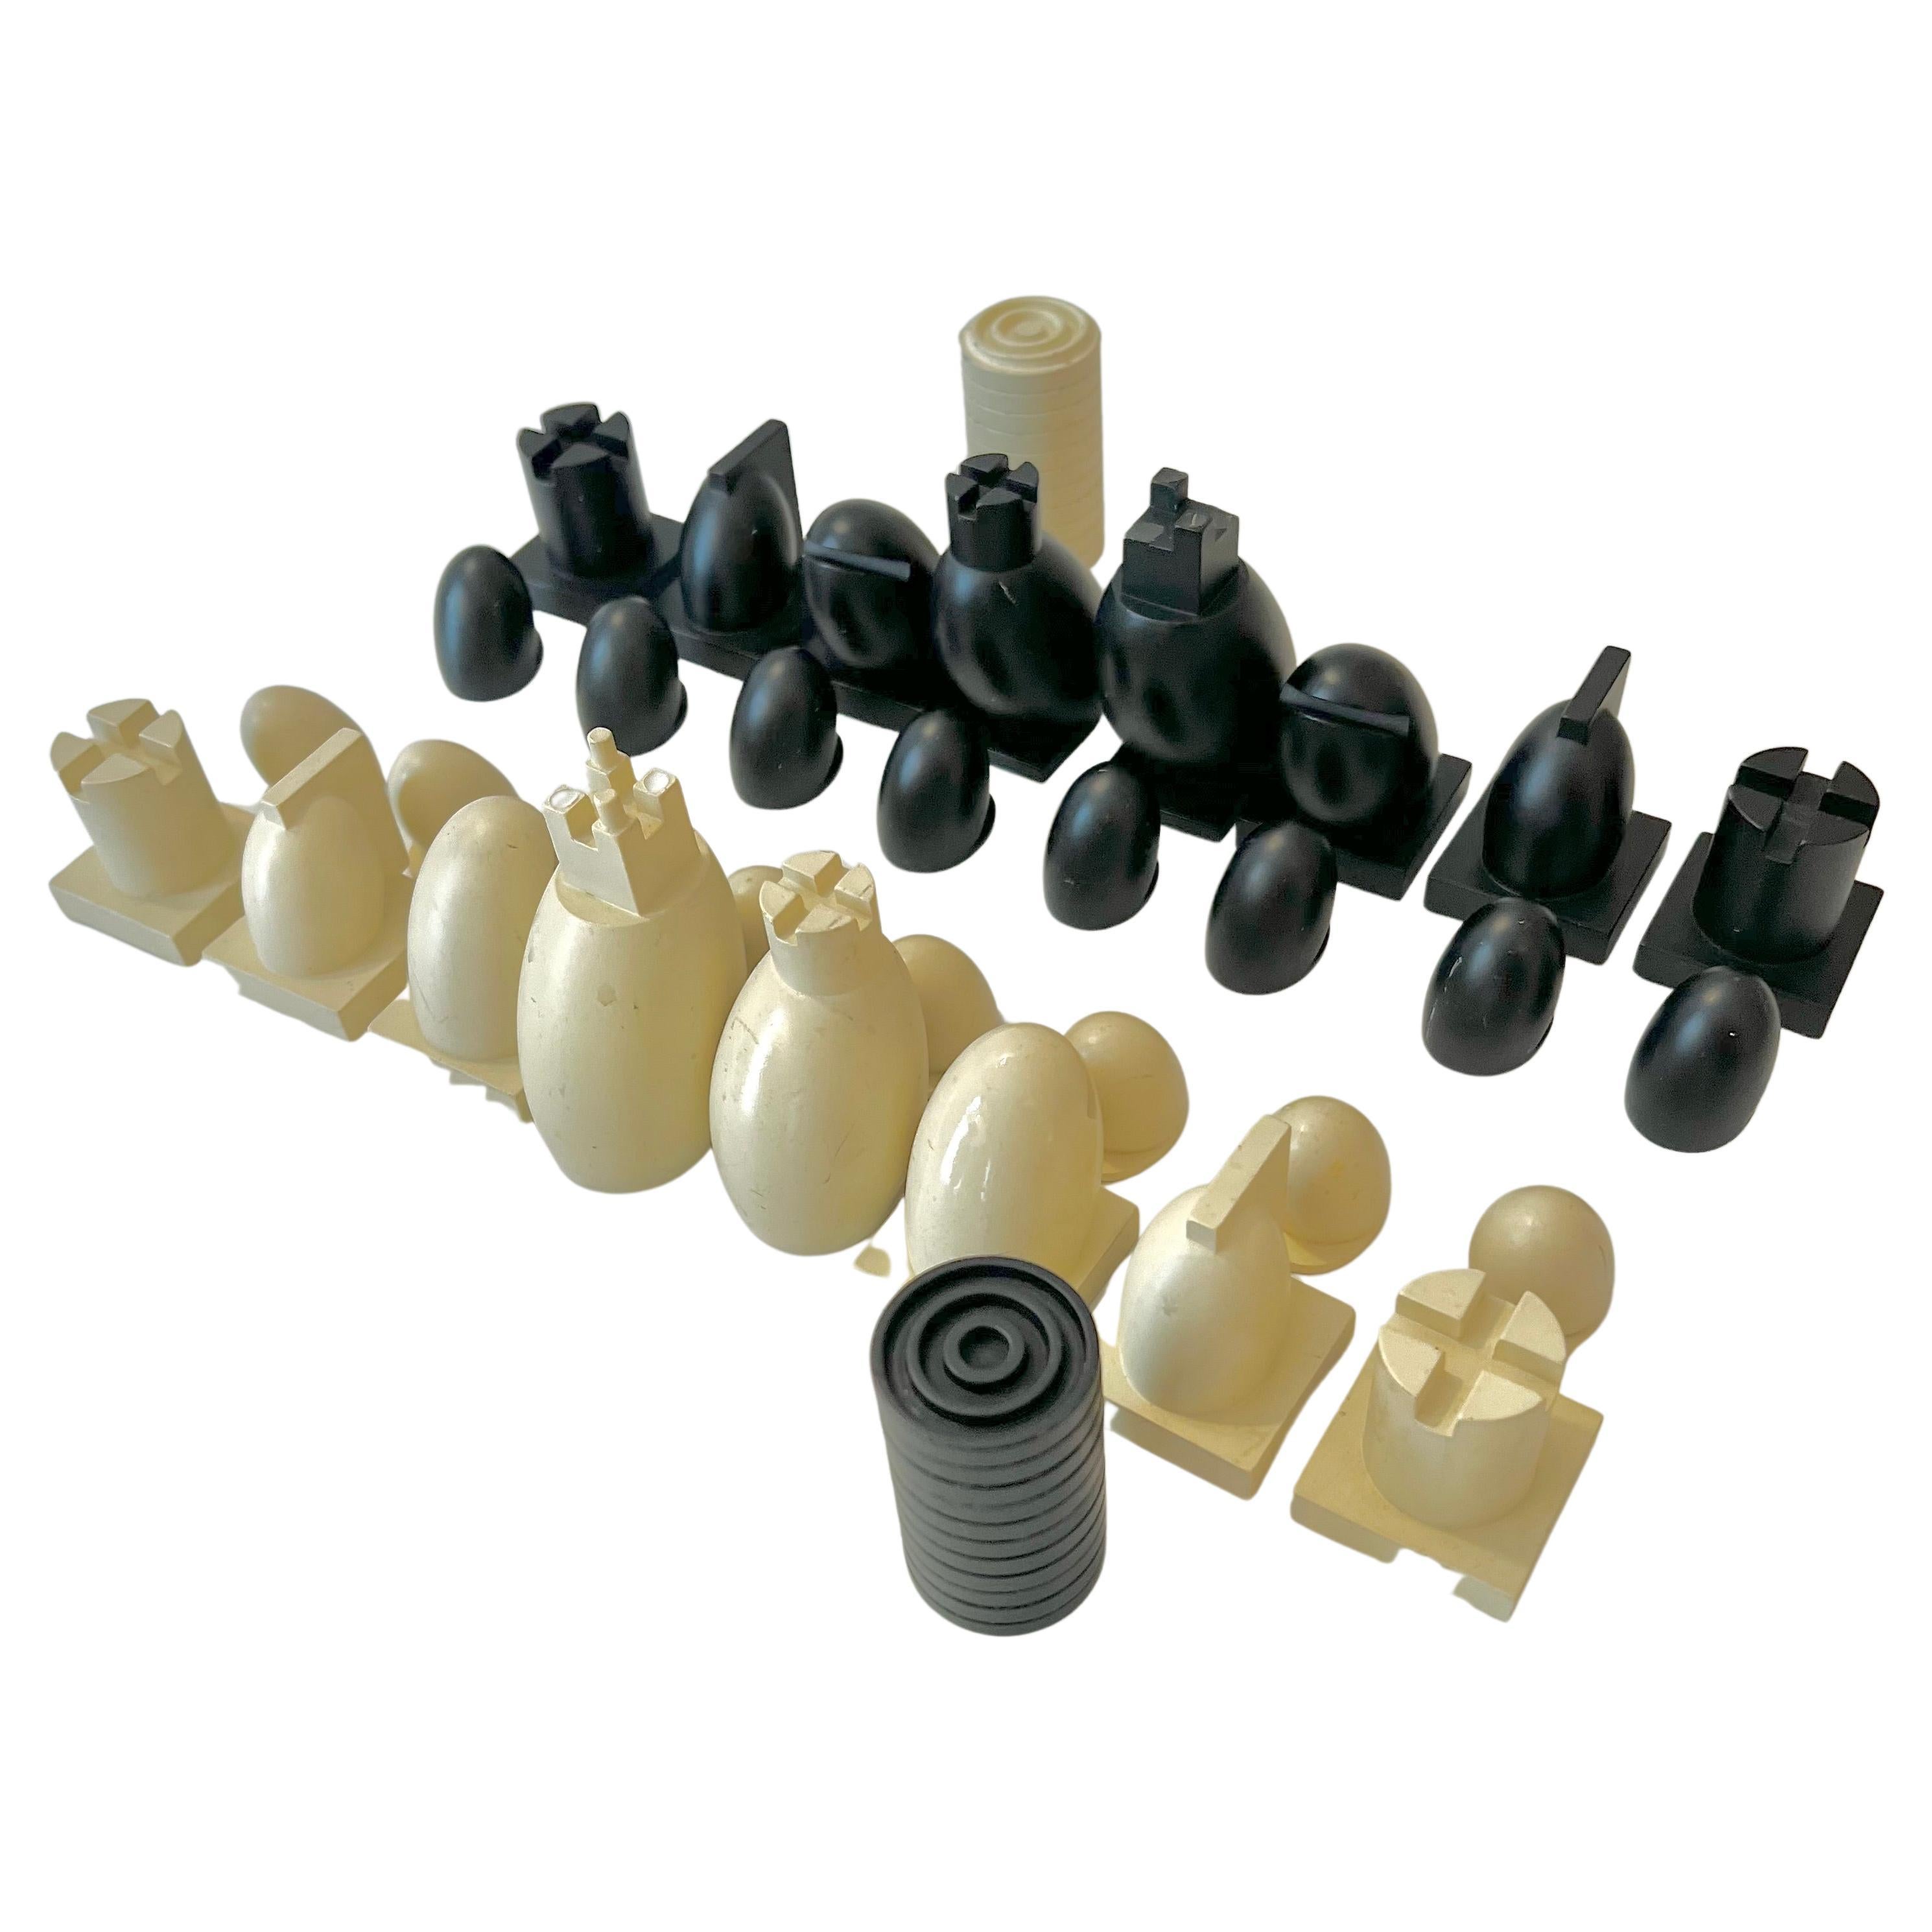 michael graves chess and checkers set